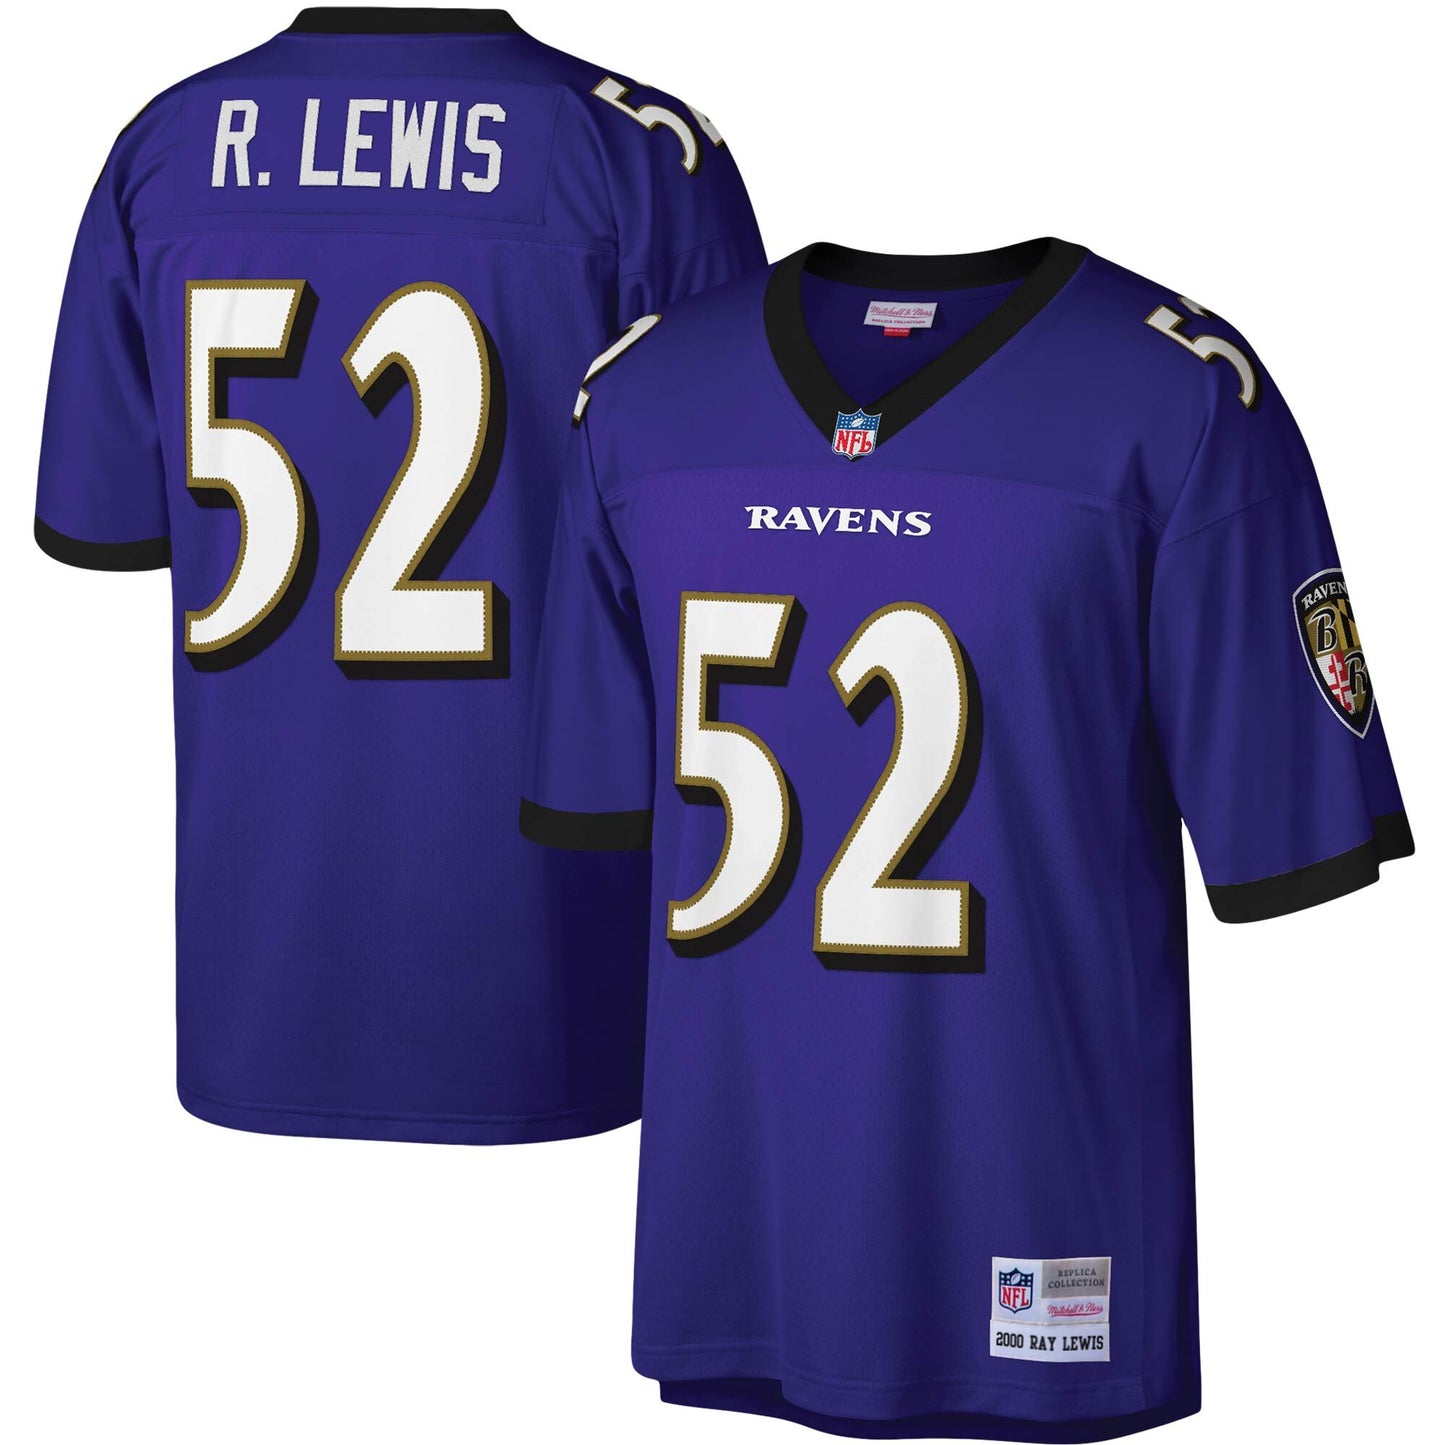 RAY LEWIS BALTIMORE RAVENS MENS MITCHELL & NESS PREMIER JERSEY